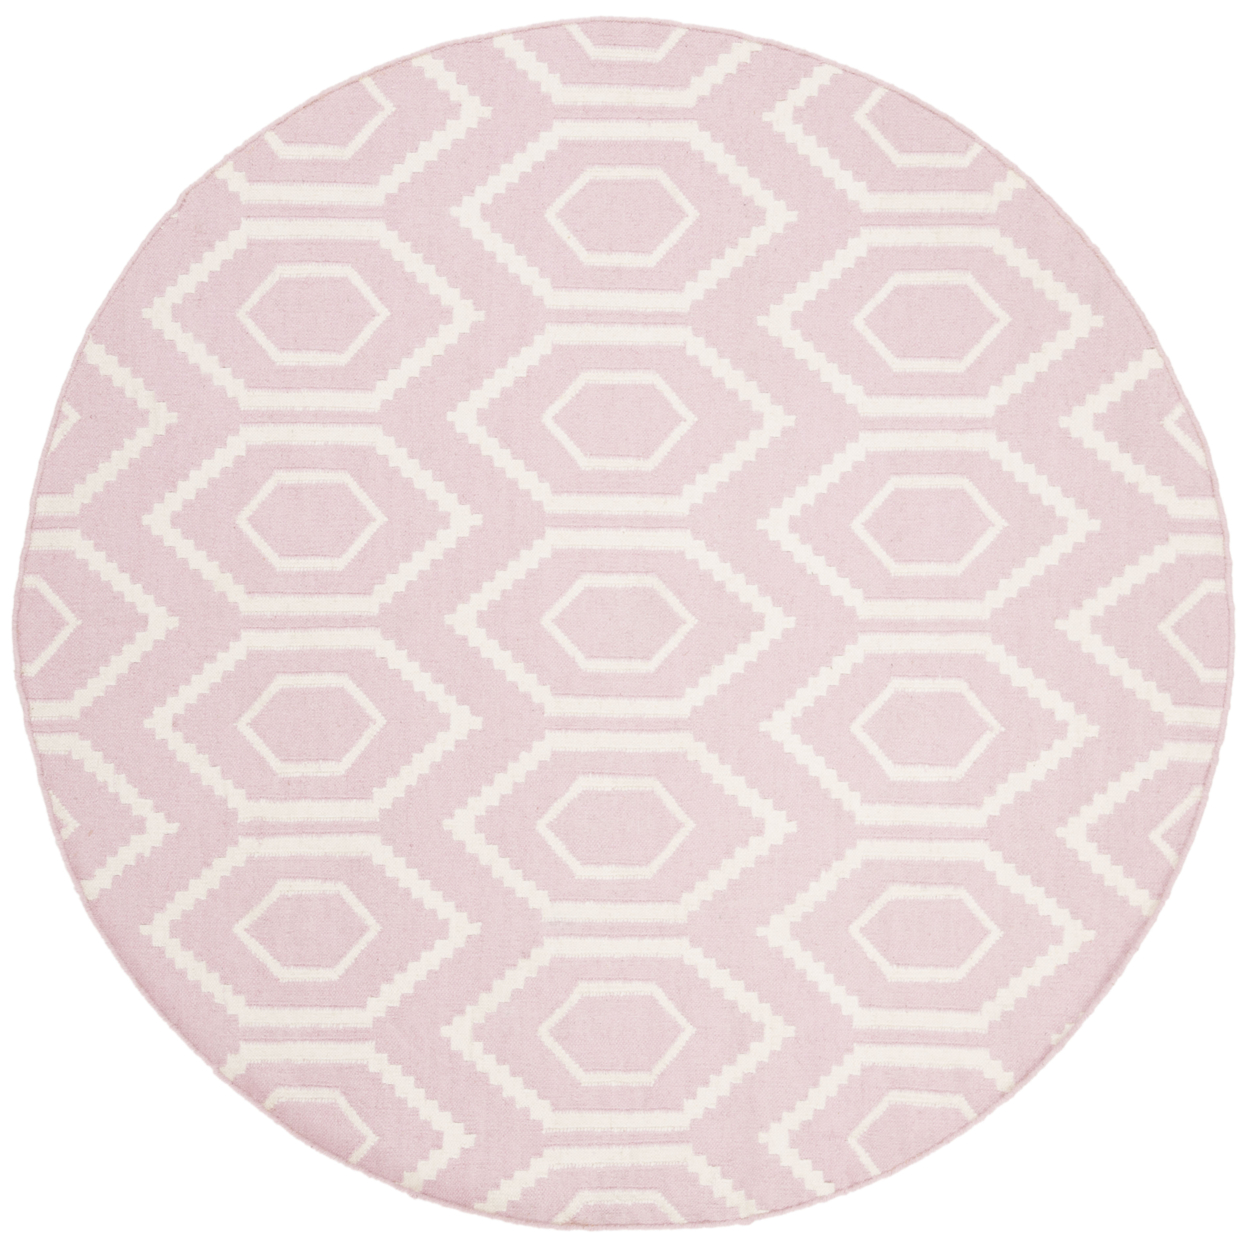 SAFAVIEH Dhurries DHU556C Handwoven Pink / Ivory Rug - Picture 11 of 11